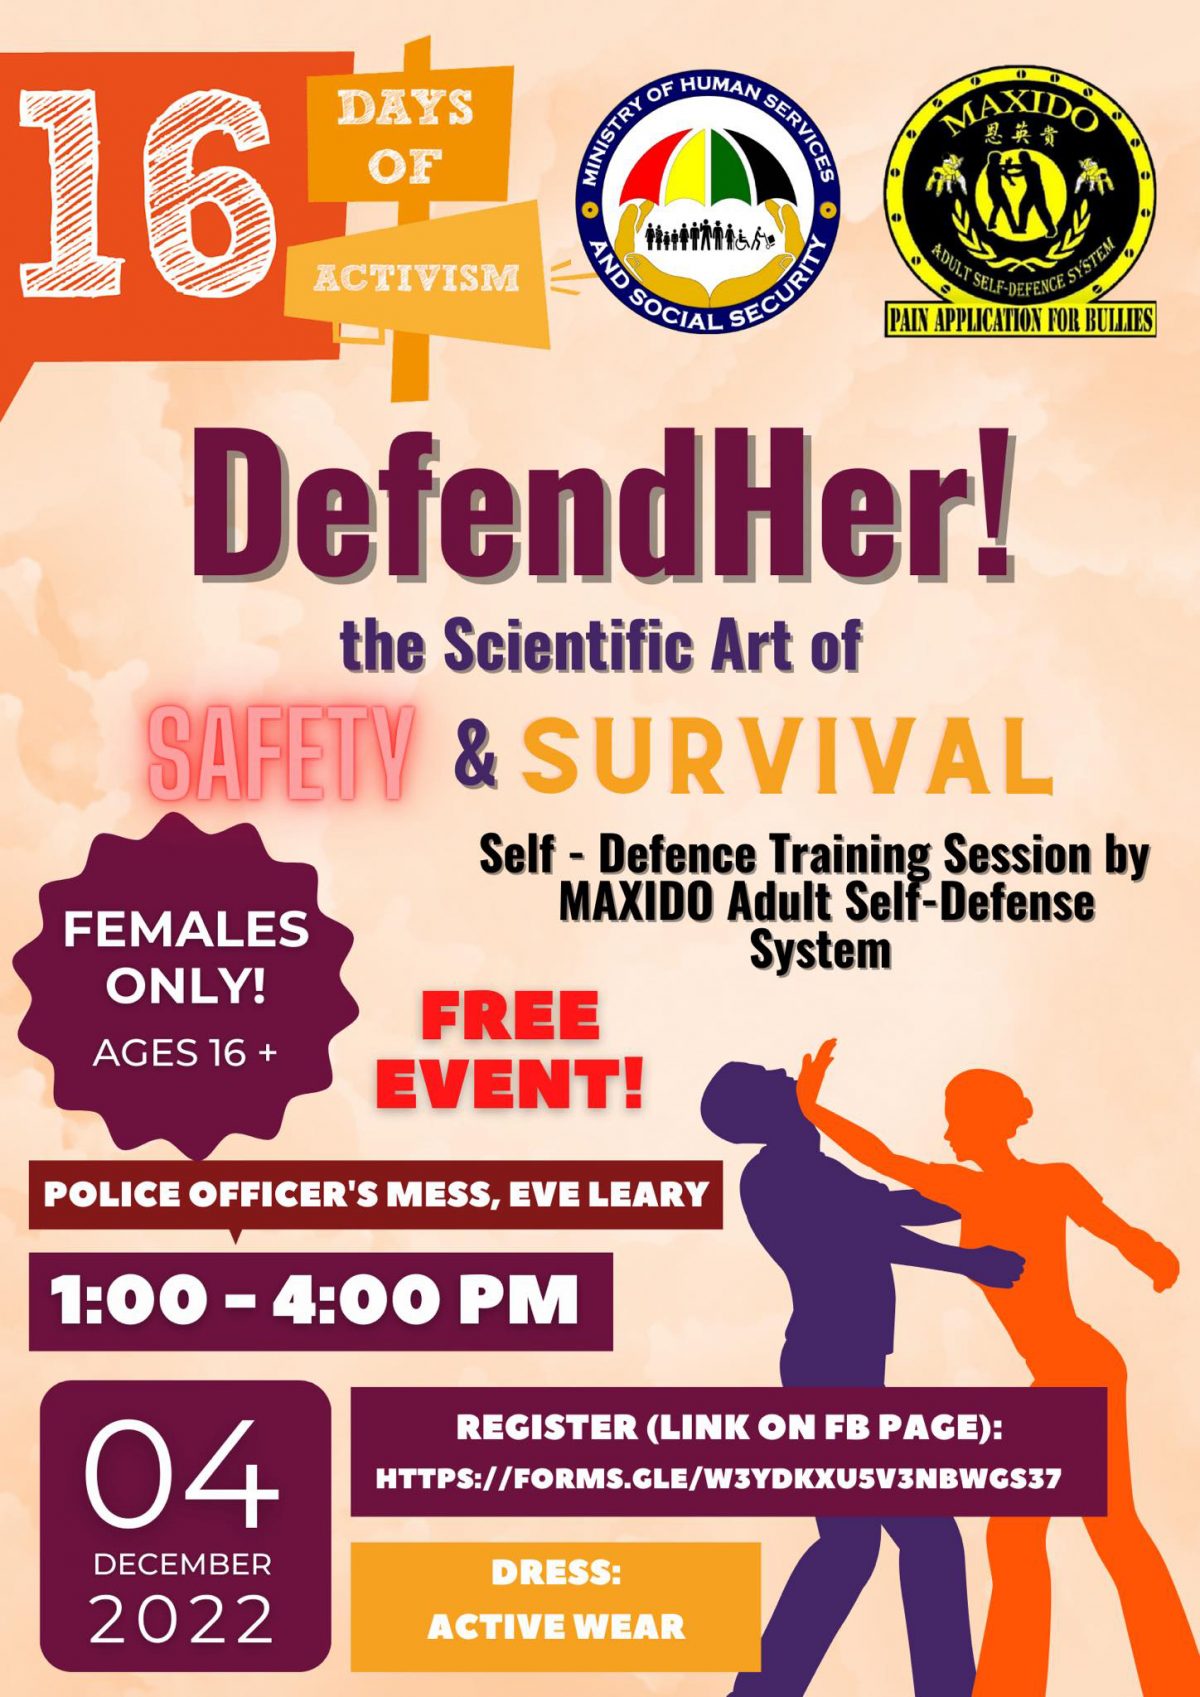 A poster for the DefendHer! event